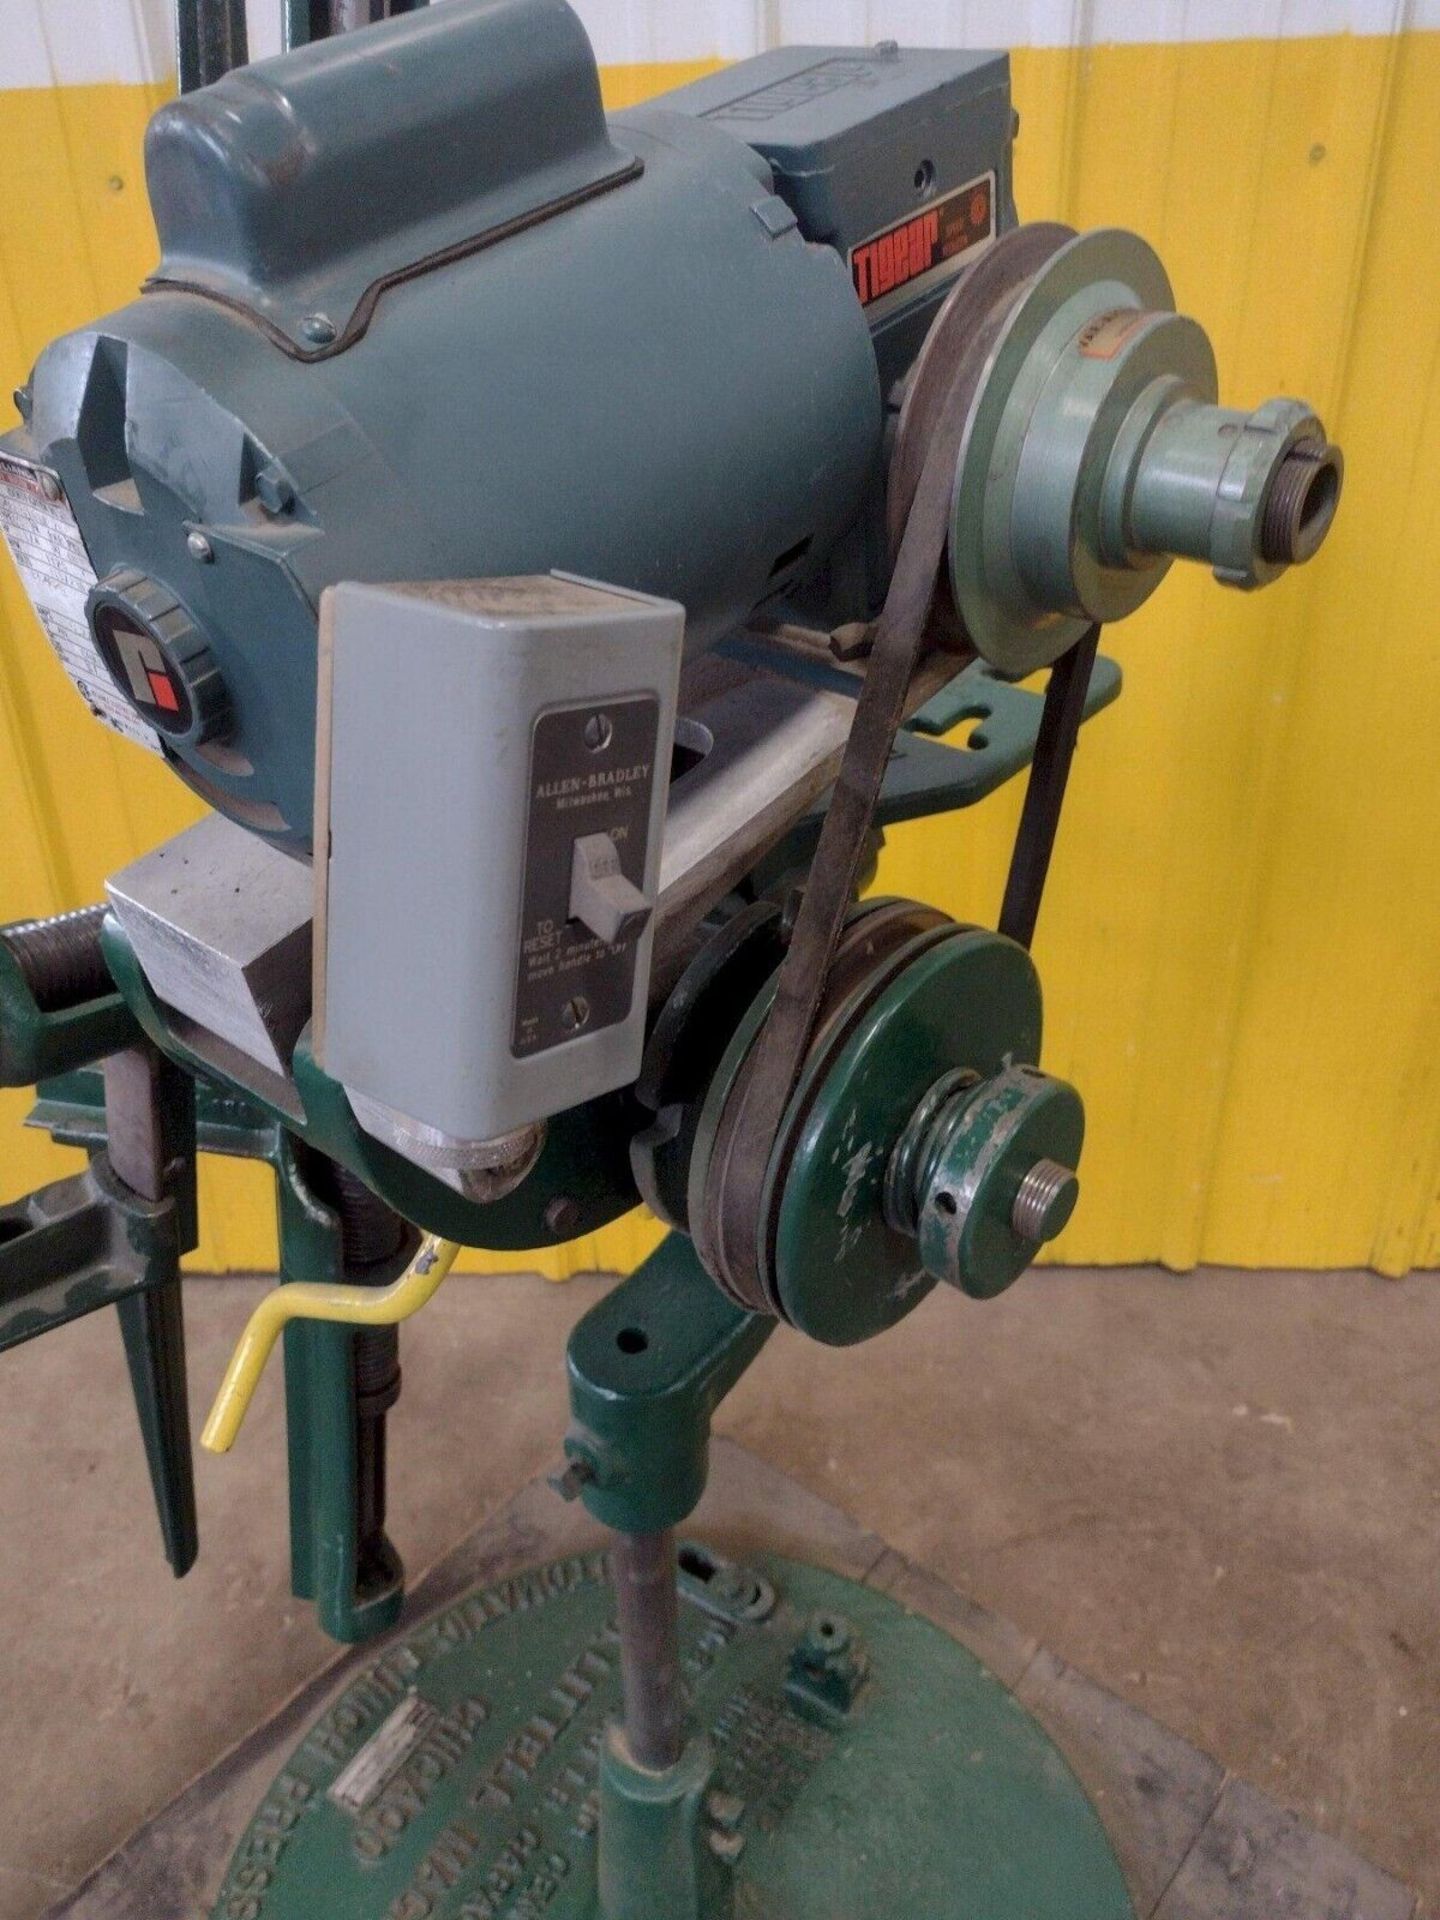 Littell Model 3 Automatic Centering Reel Uncoiler - Image 4 of 10